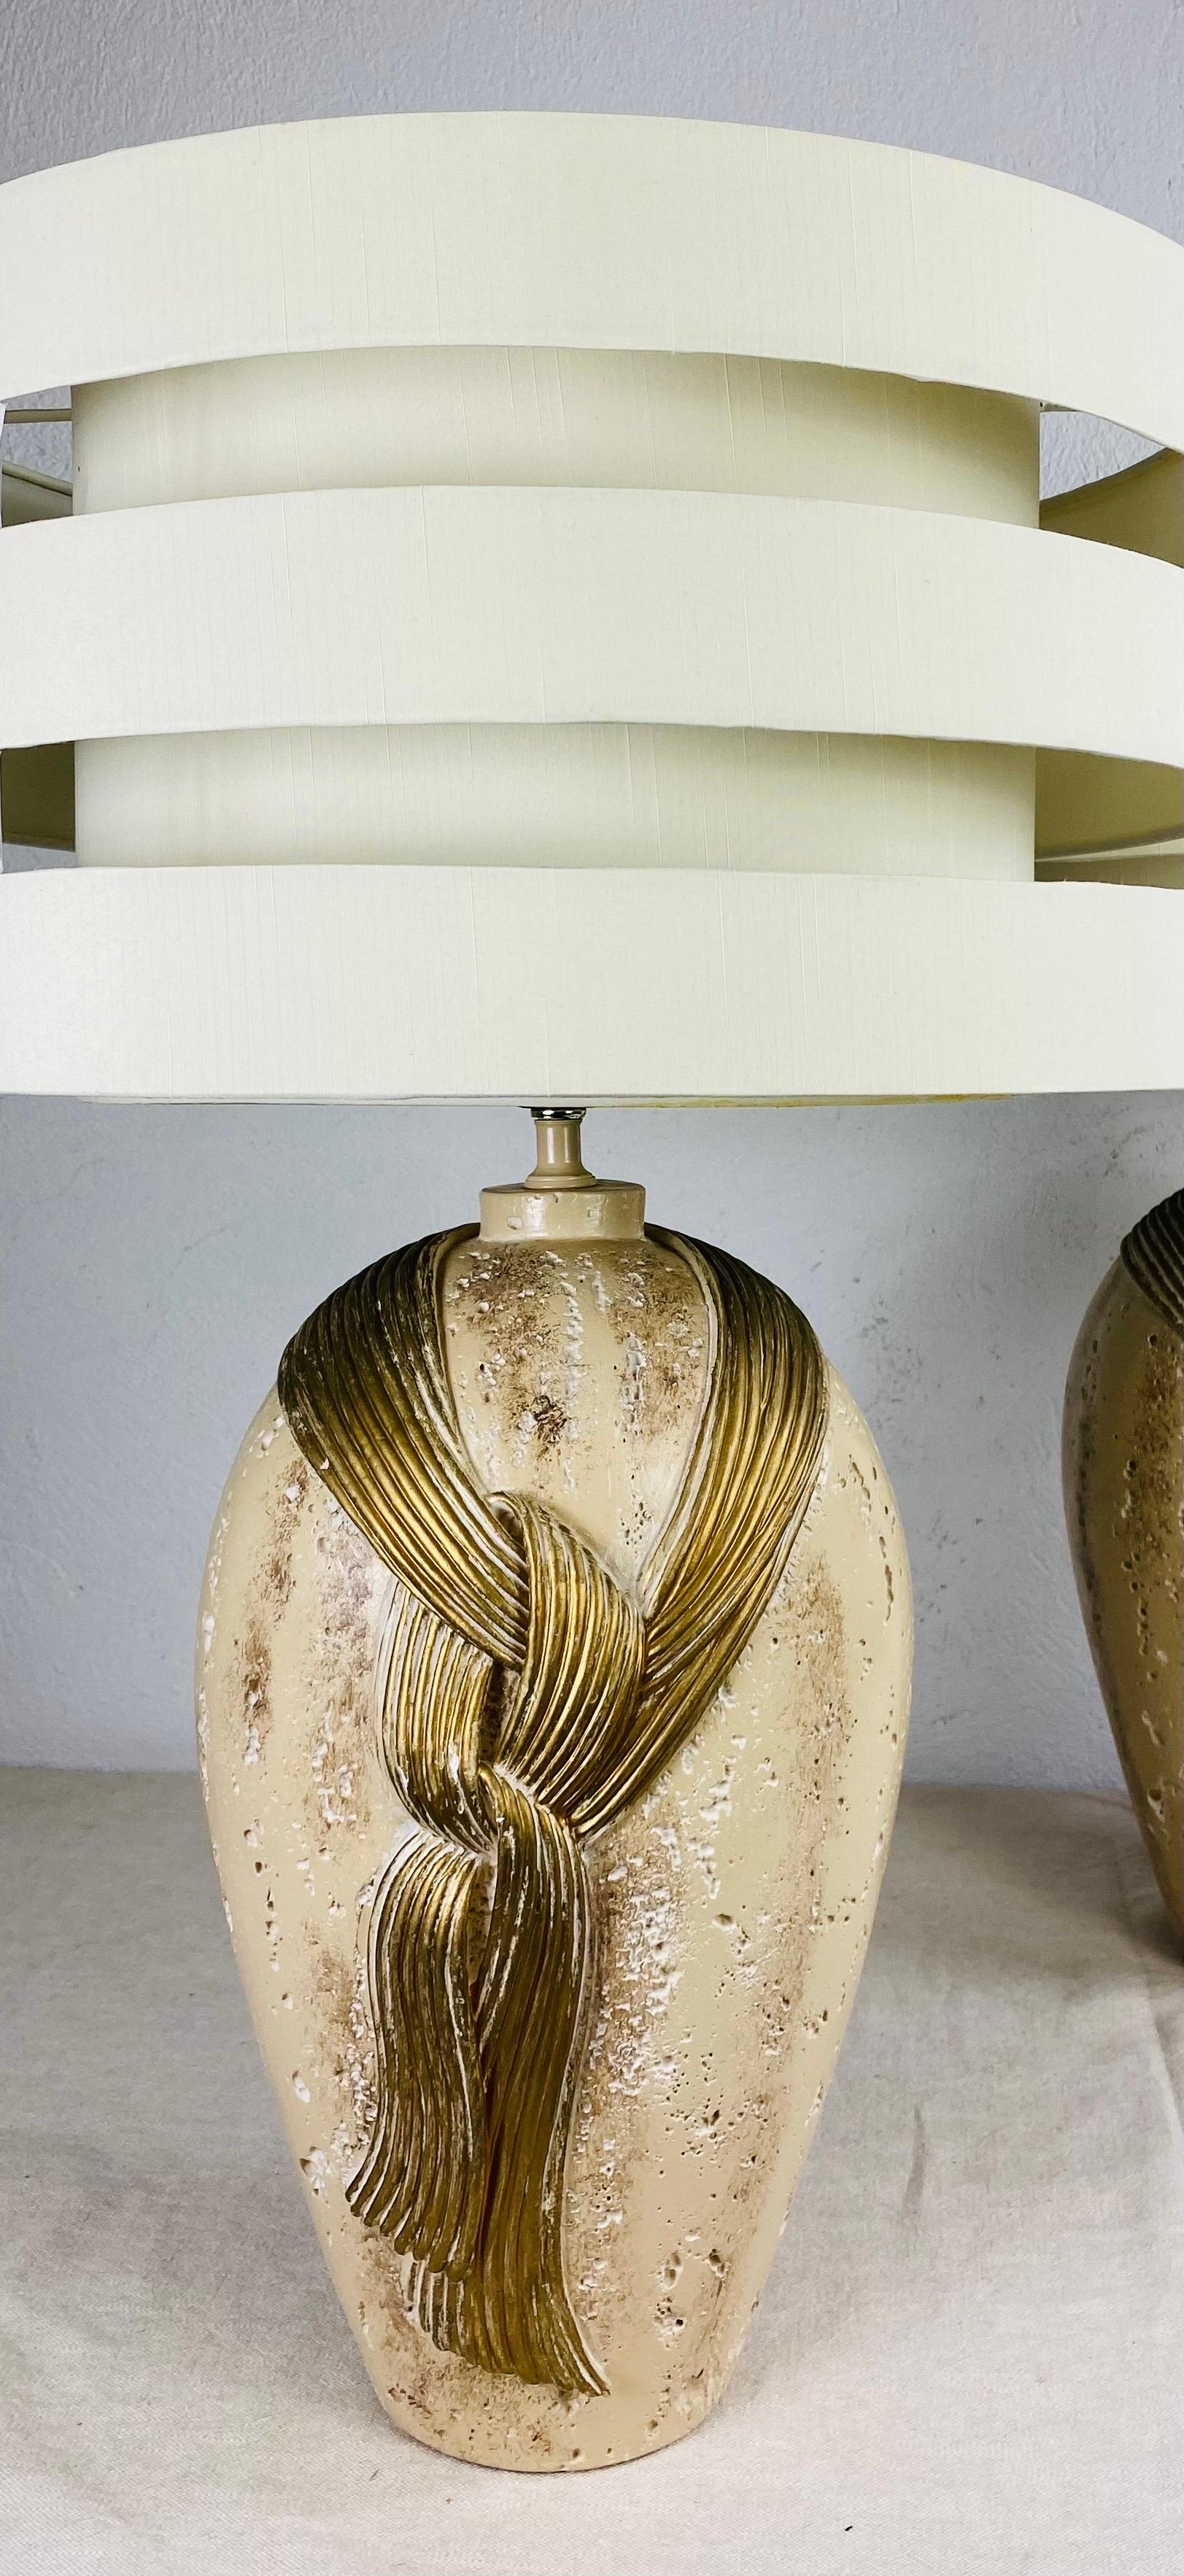 Mid-20th Century Art Deco Inspired Plaster Table Lamps with Custom Shades For Sale 2